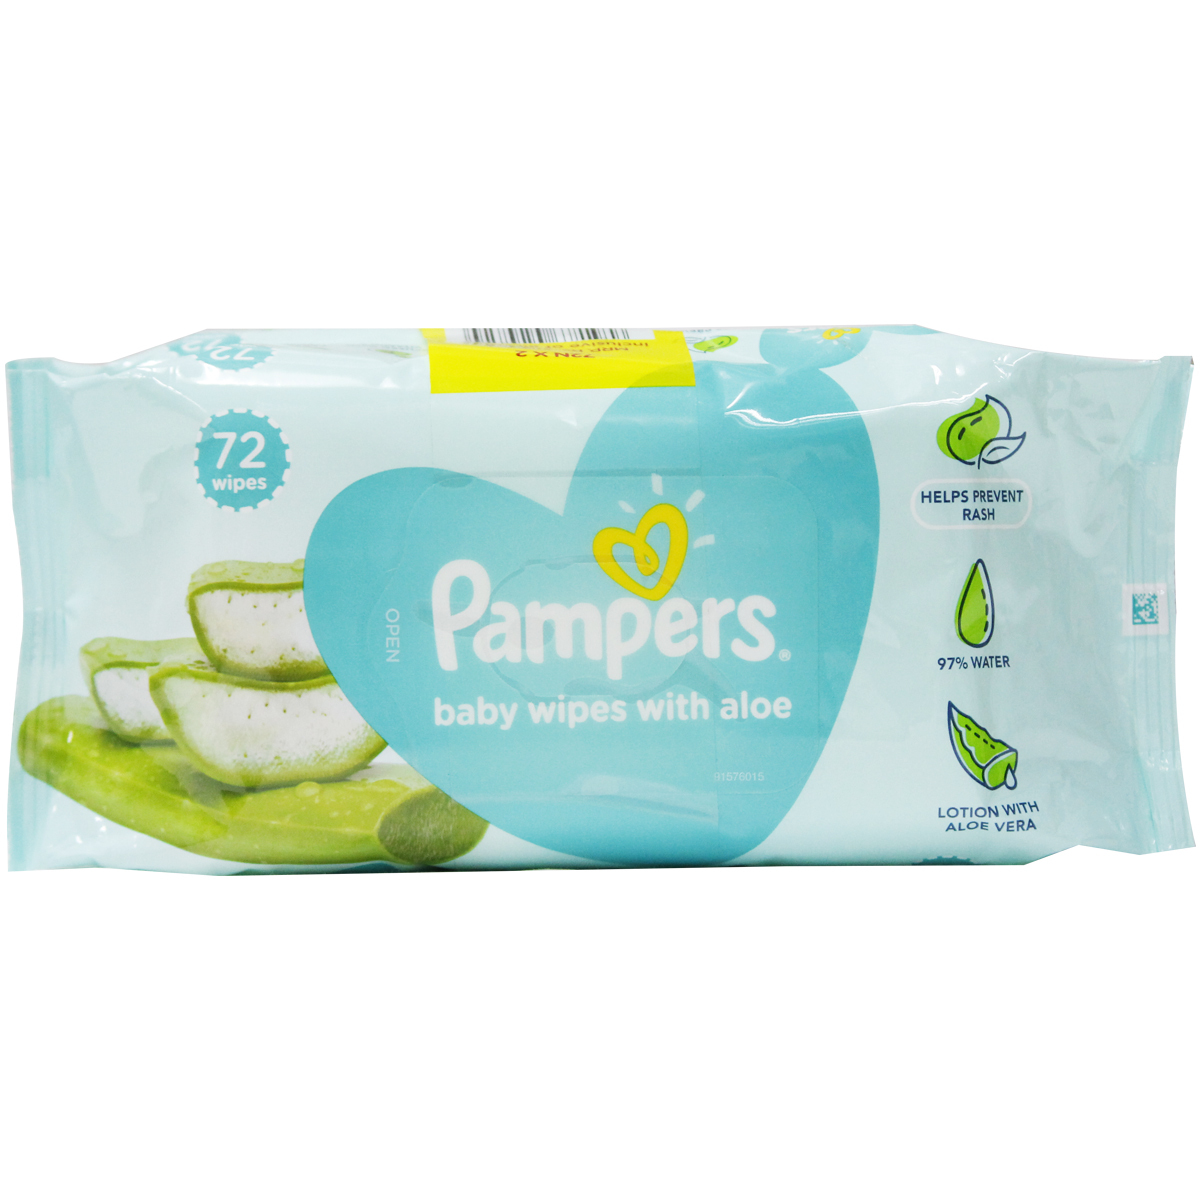 Pampers Wipes Alone 72x2's